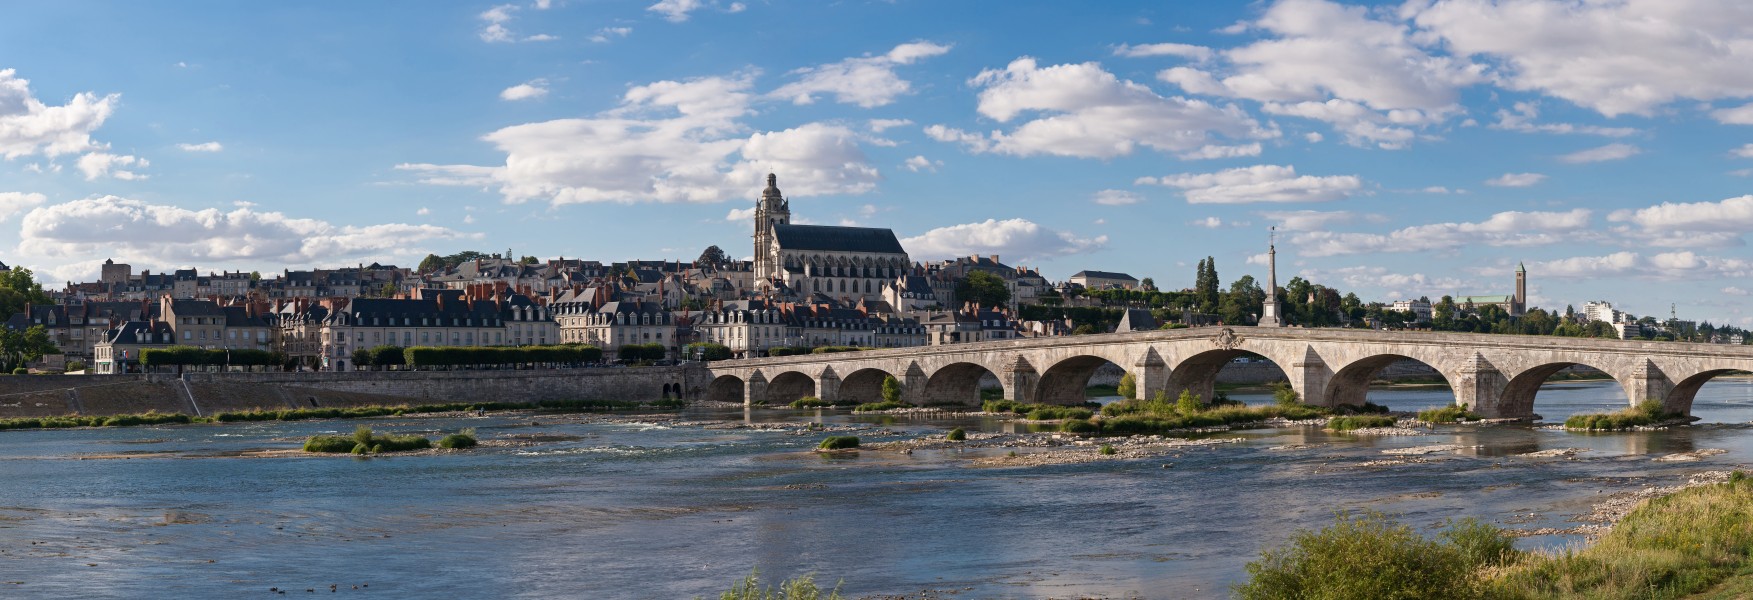 Blois Loire Panorama - July 2011